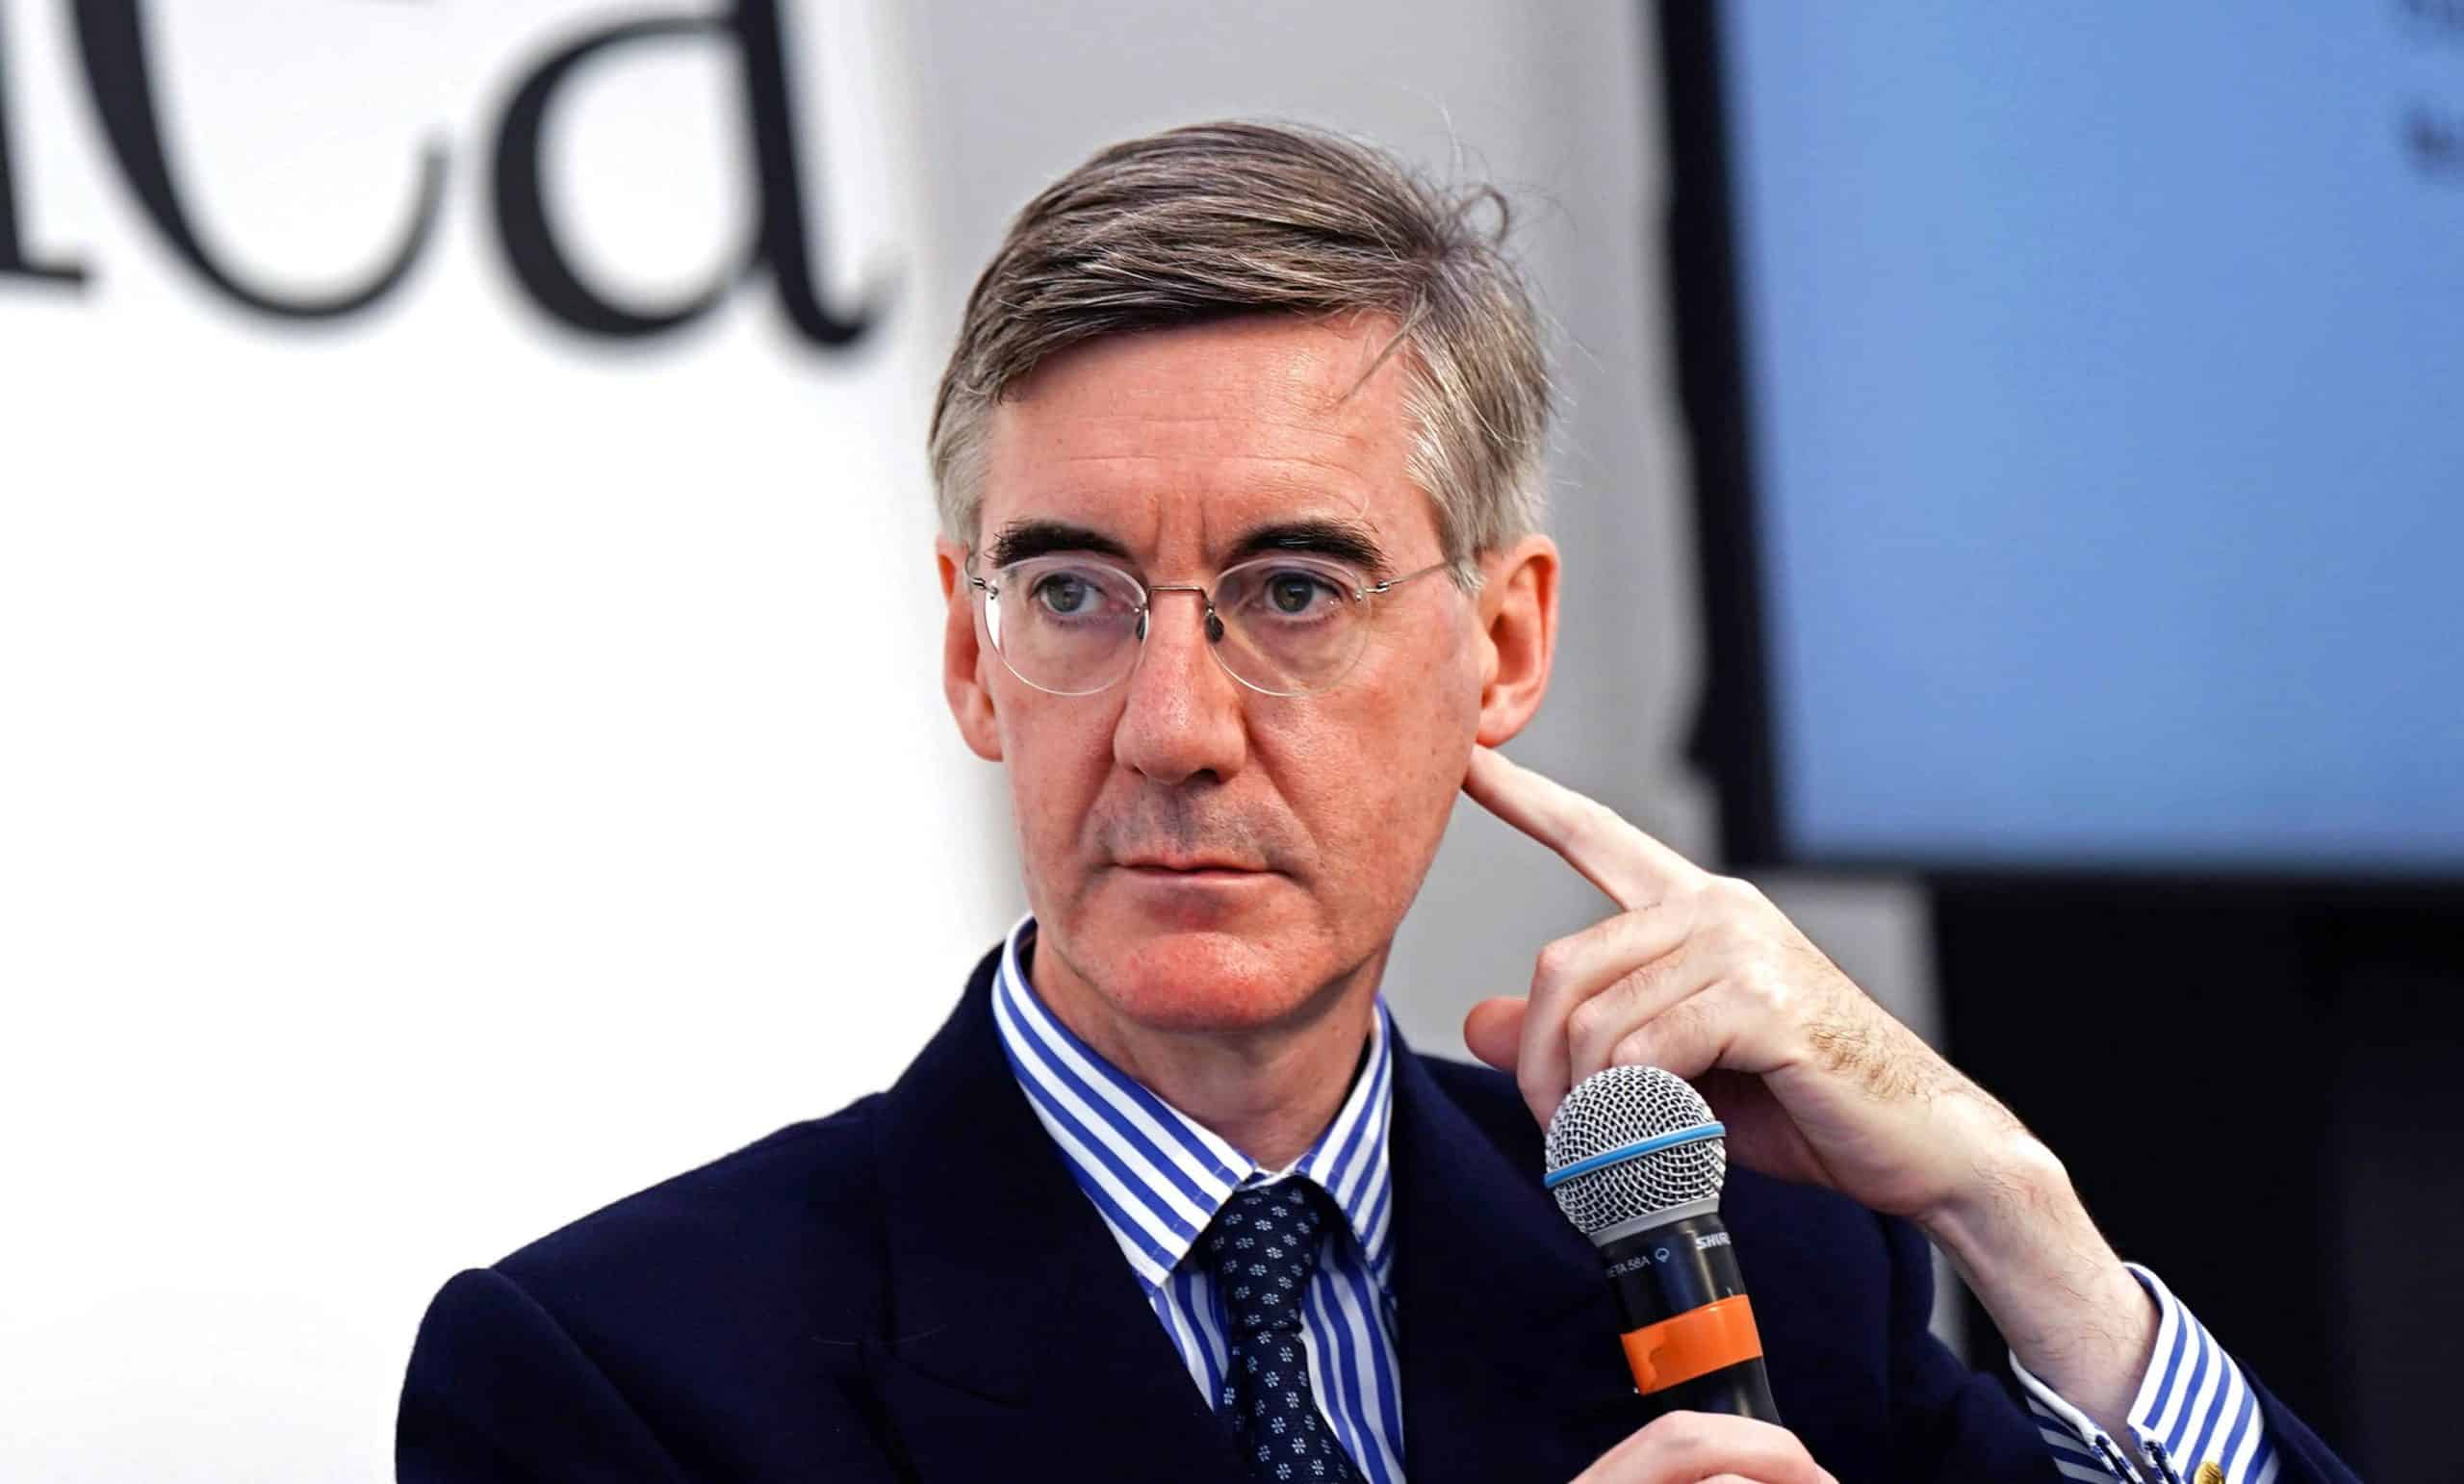 Jacob Rees-Mogg’s ECHR post gets ratioed by stunning put-down